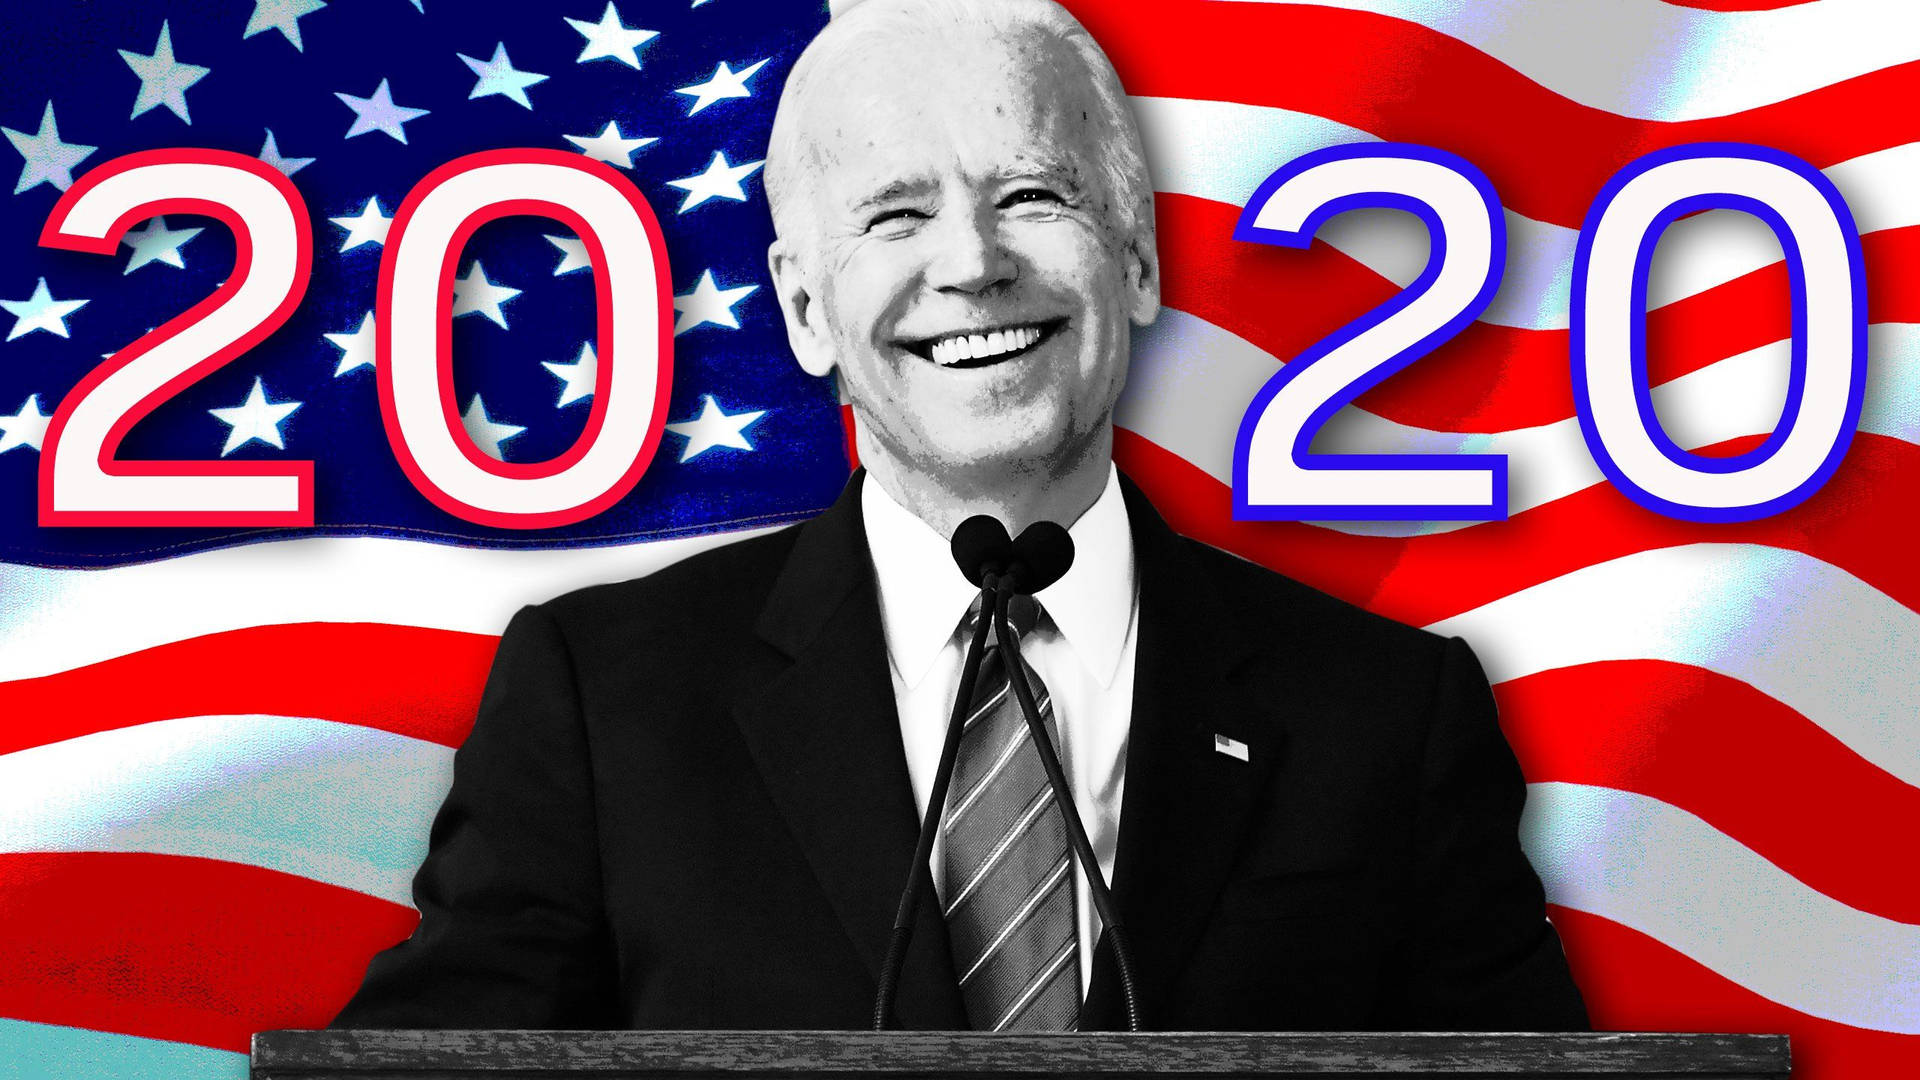 Join Joe Biden In The 2020 Election Background